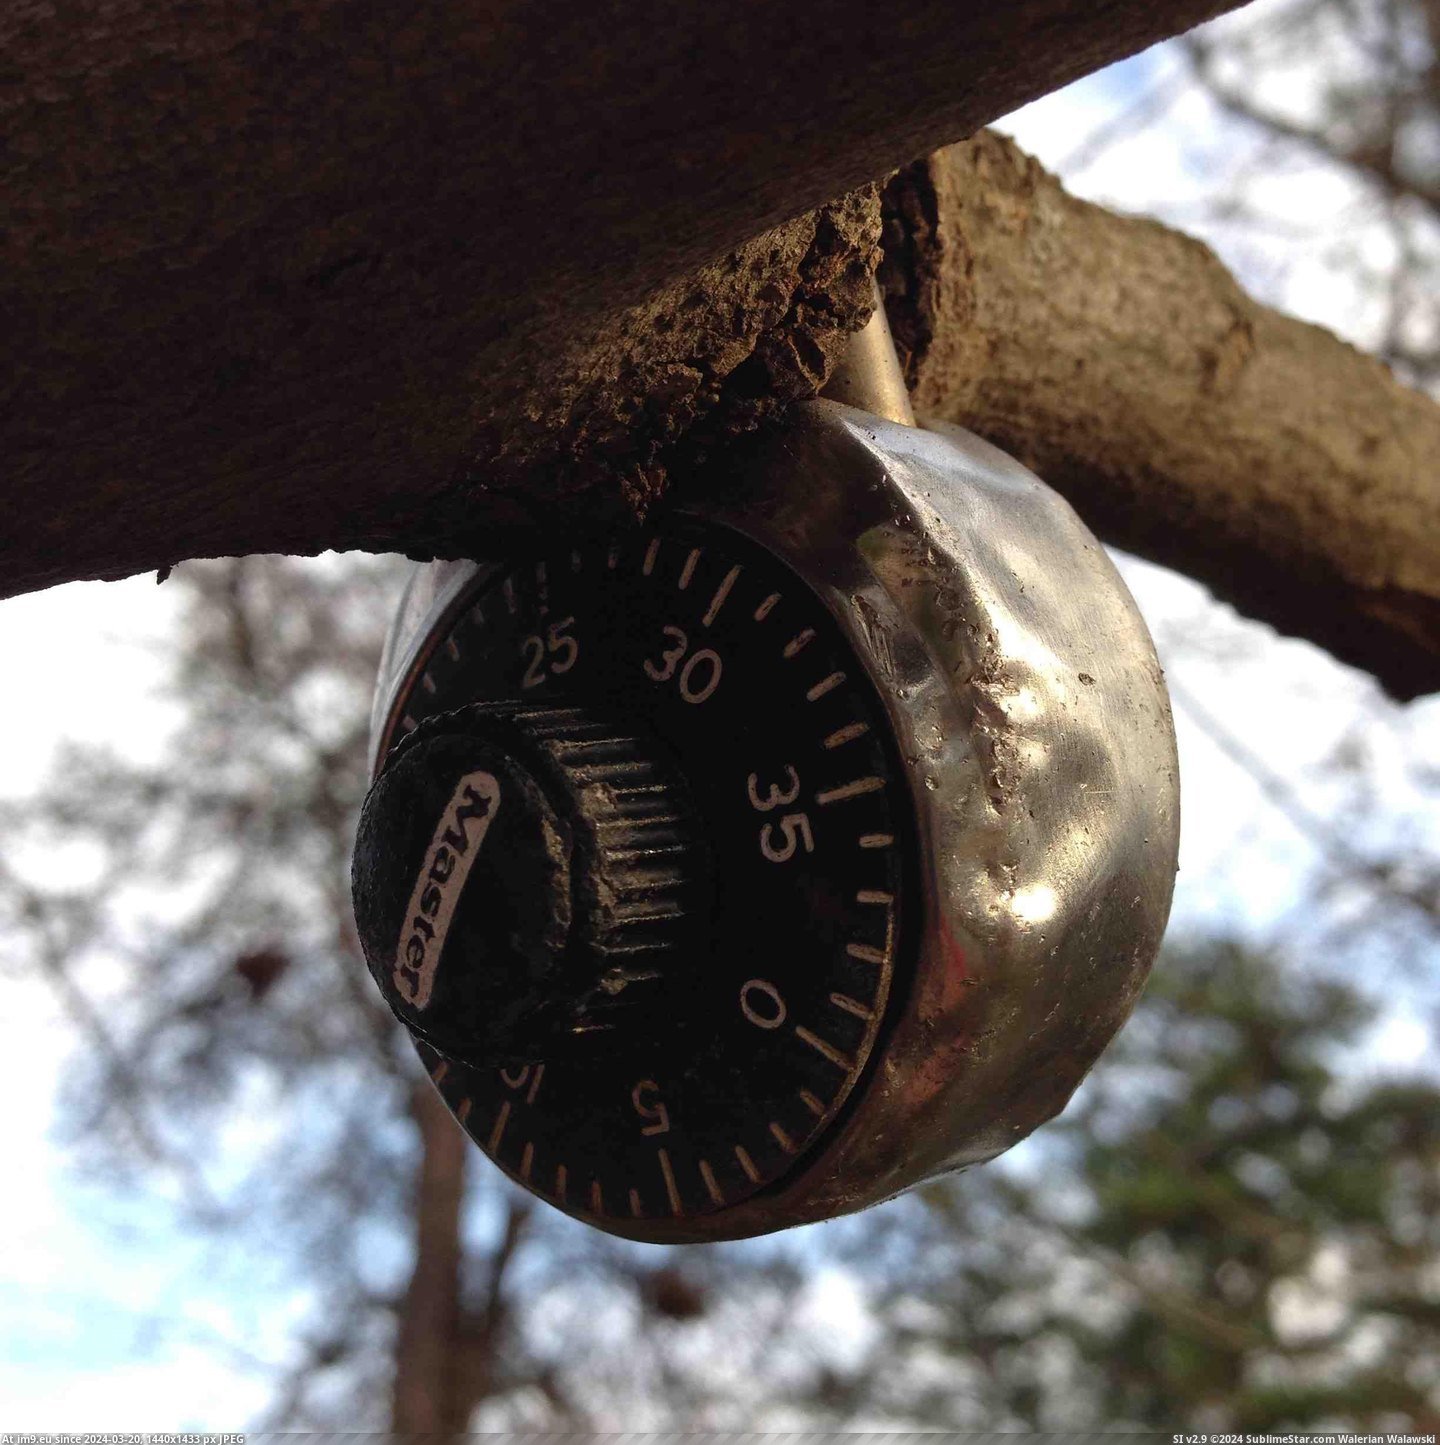 #Wtf #One #For #Code #Arm #Lock #Years #Did #Tree [Wtf] In response to the lock in the arm, this lock has been on the tree for 20 years. No one knows the code or who did it. Pic. (Изображение из альбом My r/WTF favs))